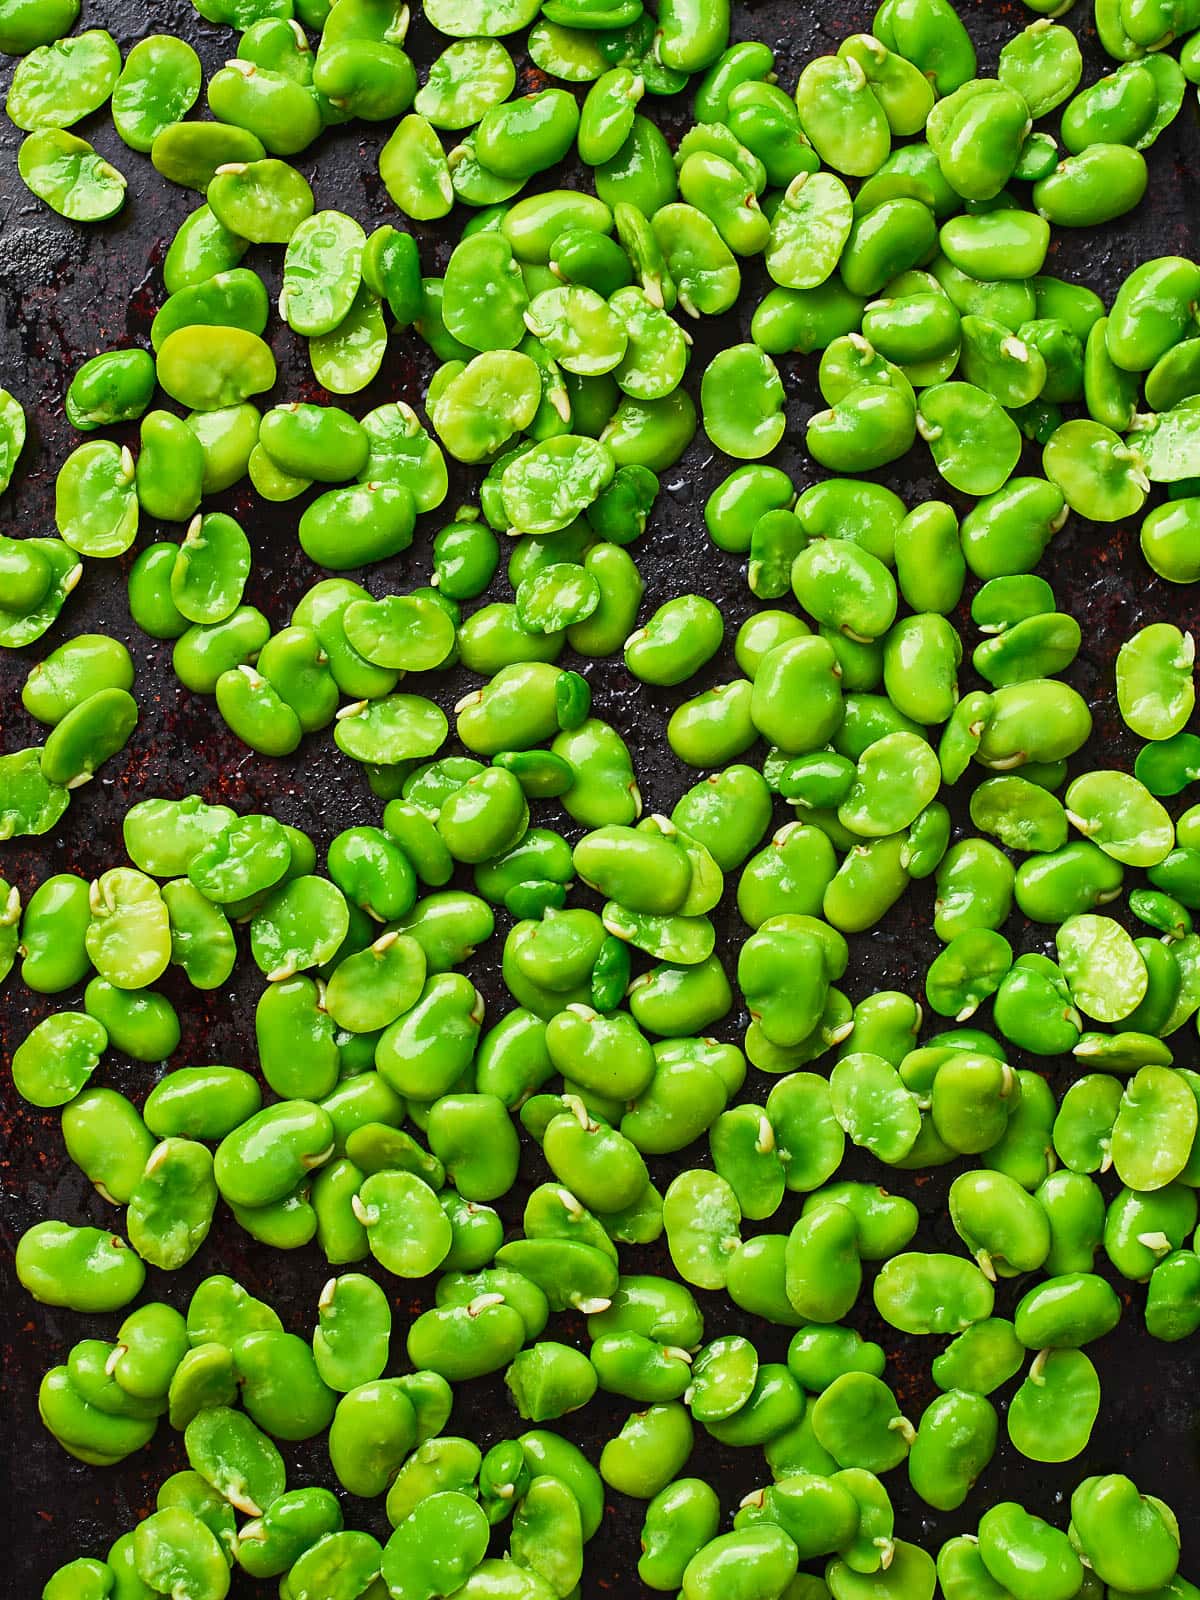 Broad beans on a baking tray